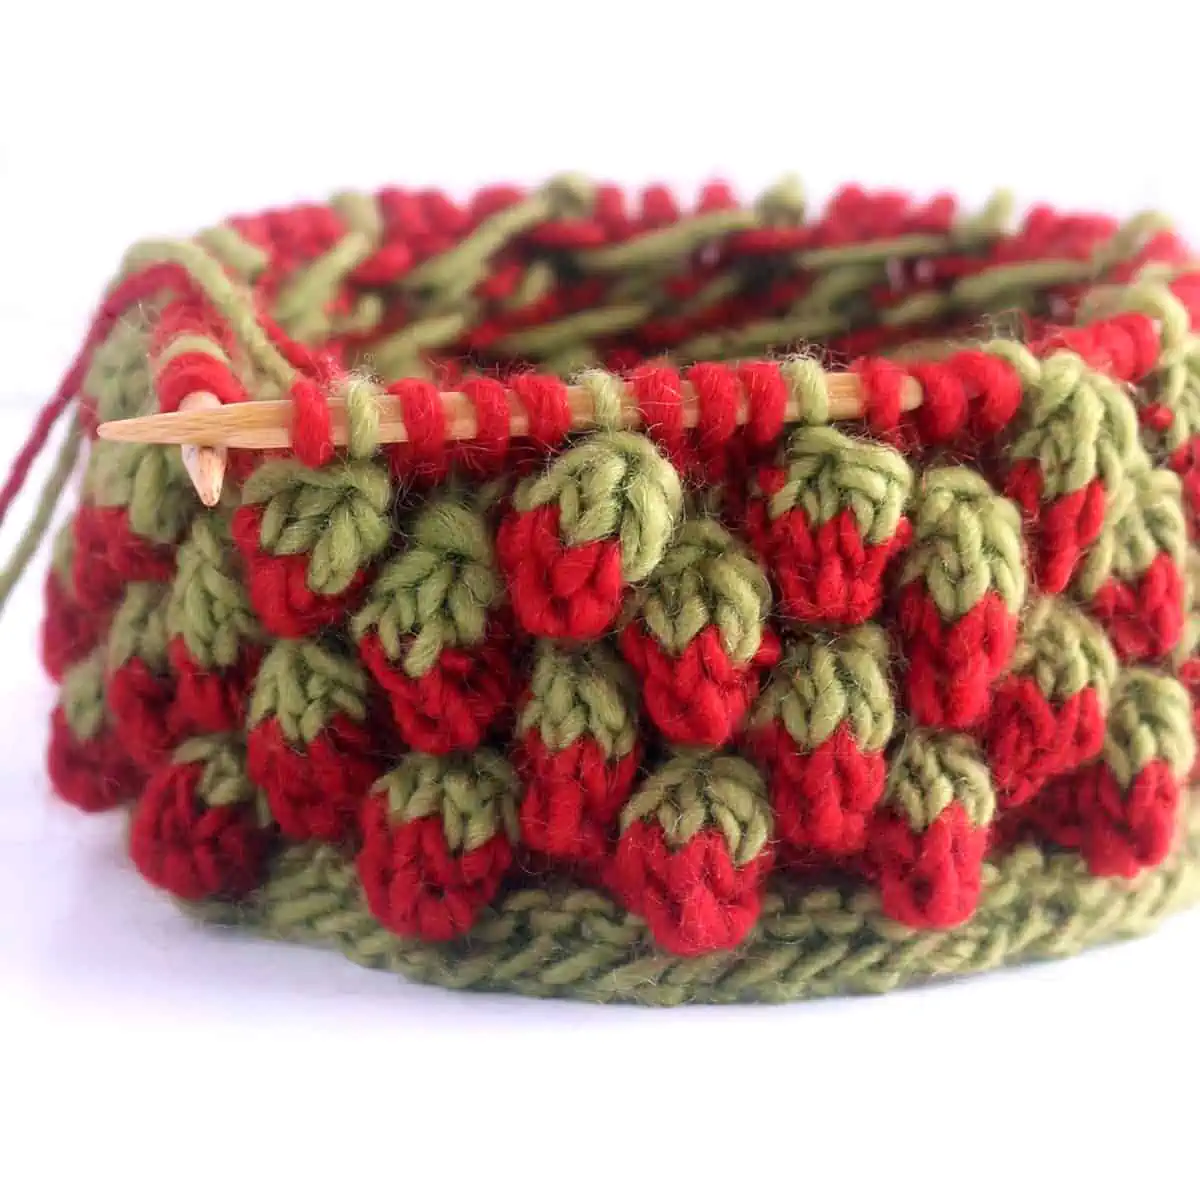 Strawberry bobble stitch knitted in red and green yarn colors on a bamboo circular knitting needle.